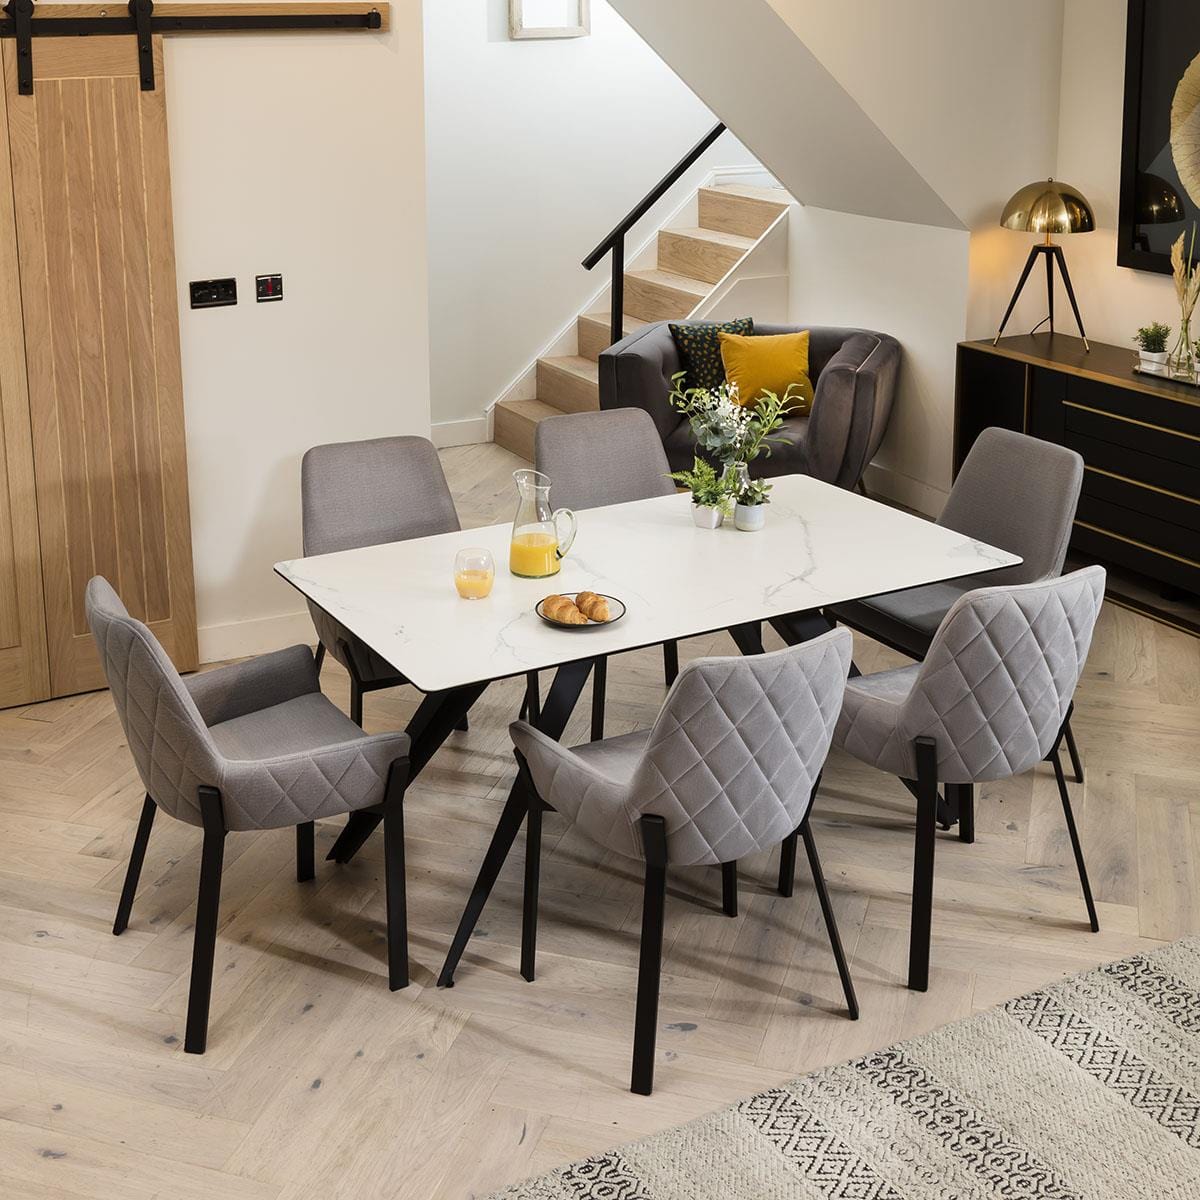 Quatropi Luxurious White Ceramic Table With 6 Exclusive Grey Carver Chairs